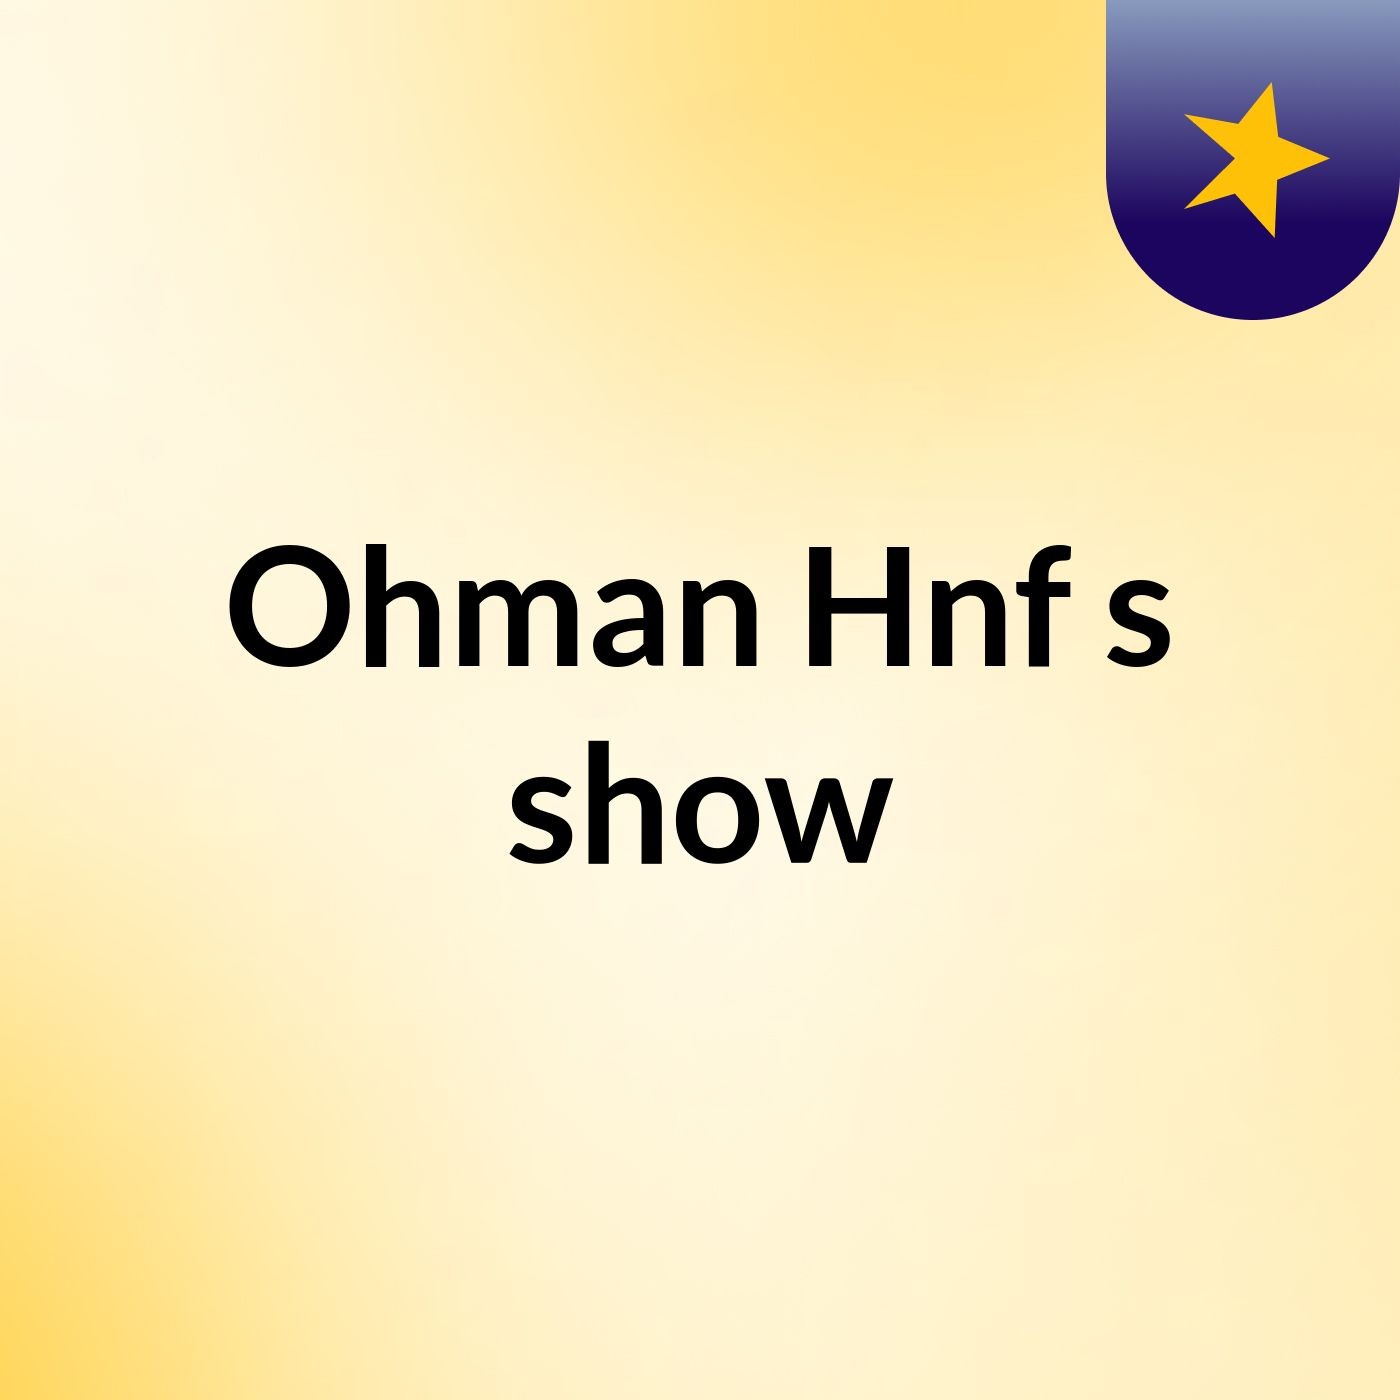 Ohman Hnf's show